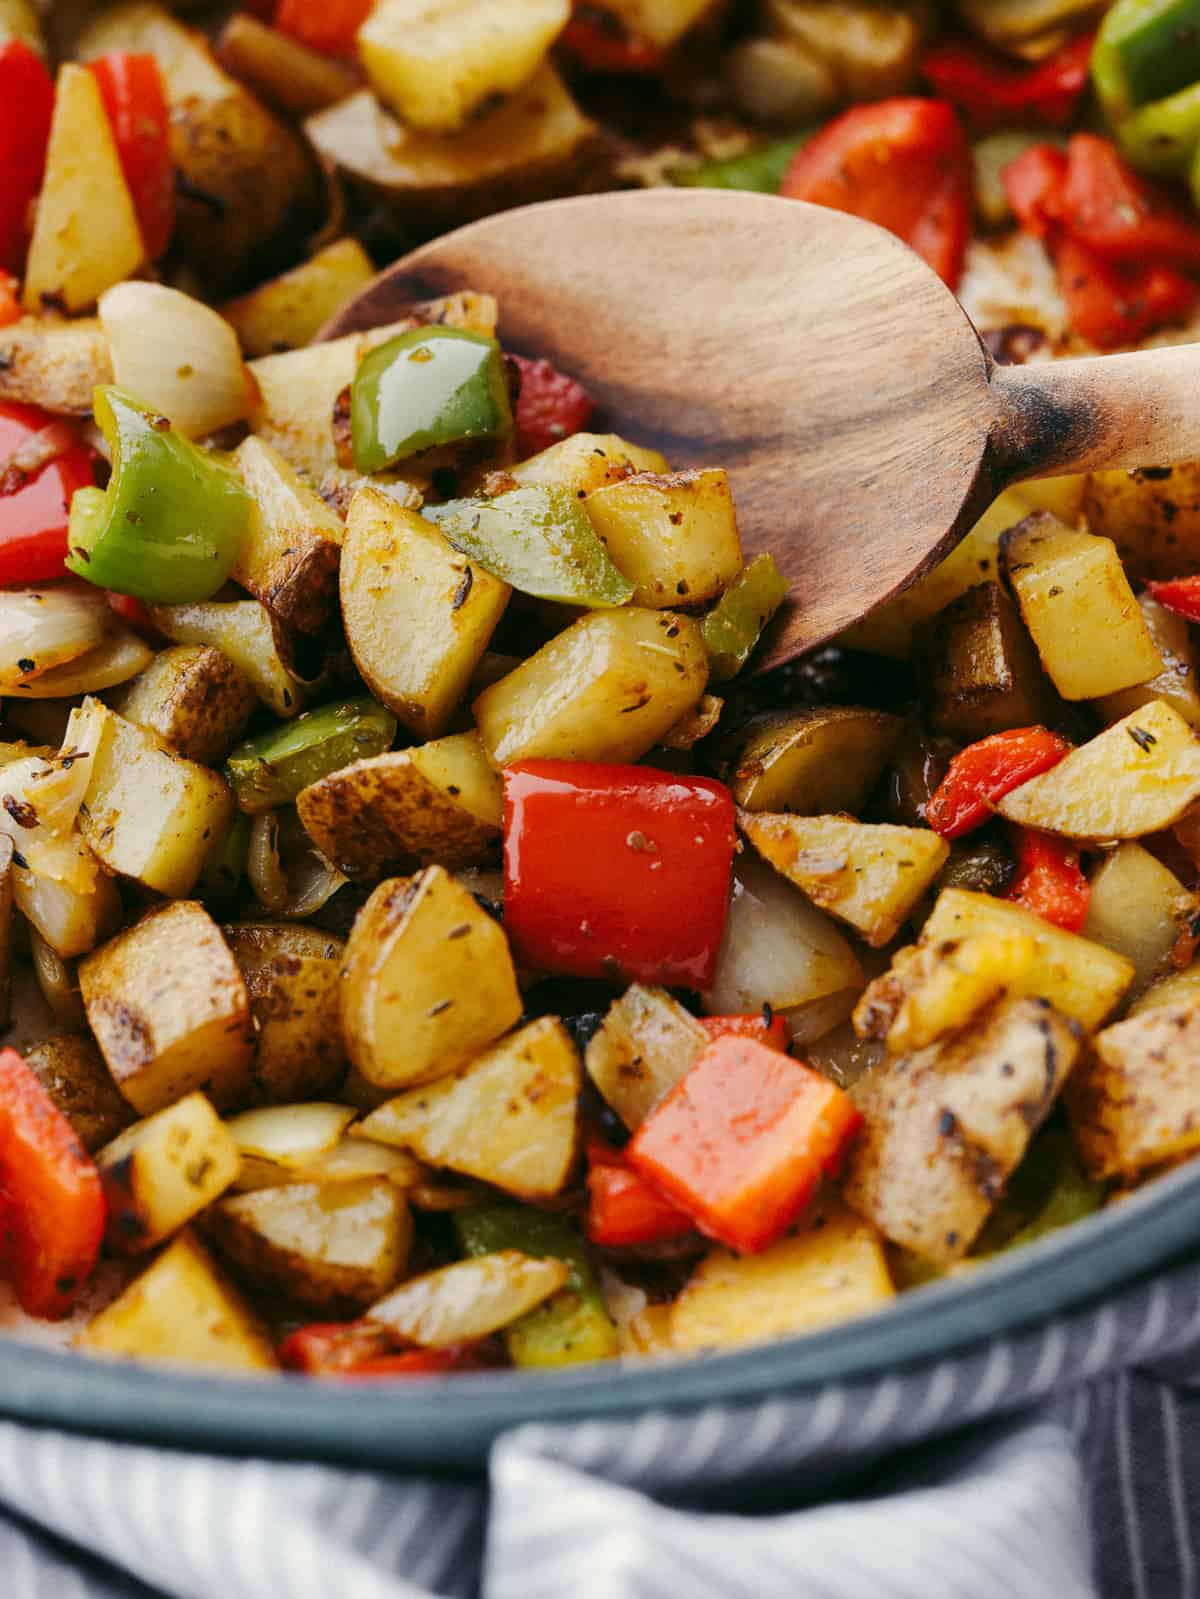 Easy Breakfast Potatoes With Bell Peppers - No Getting Off This Train